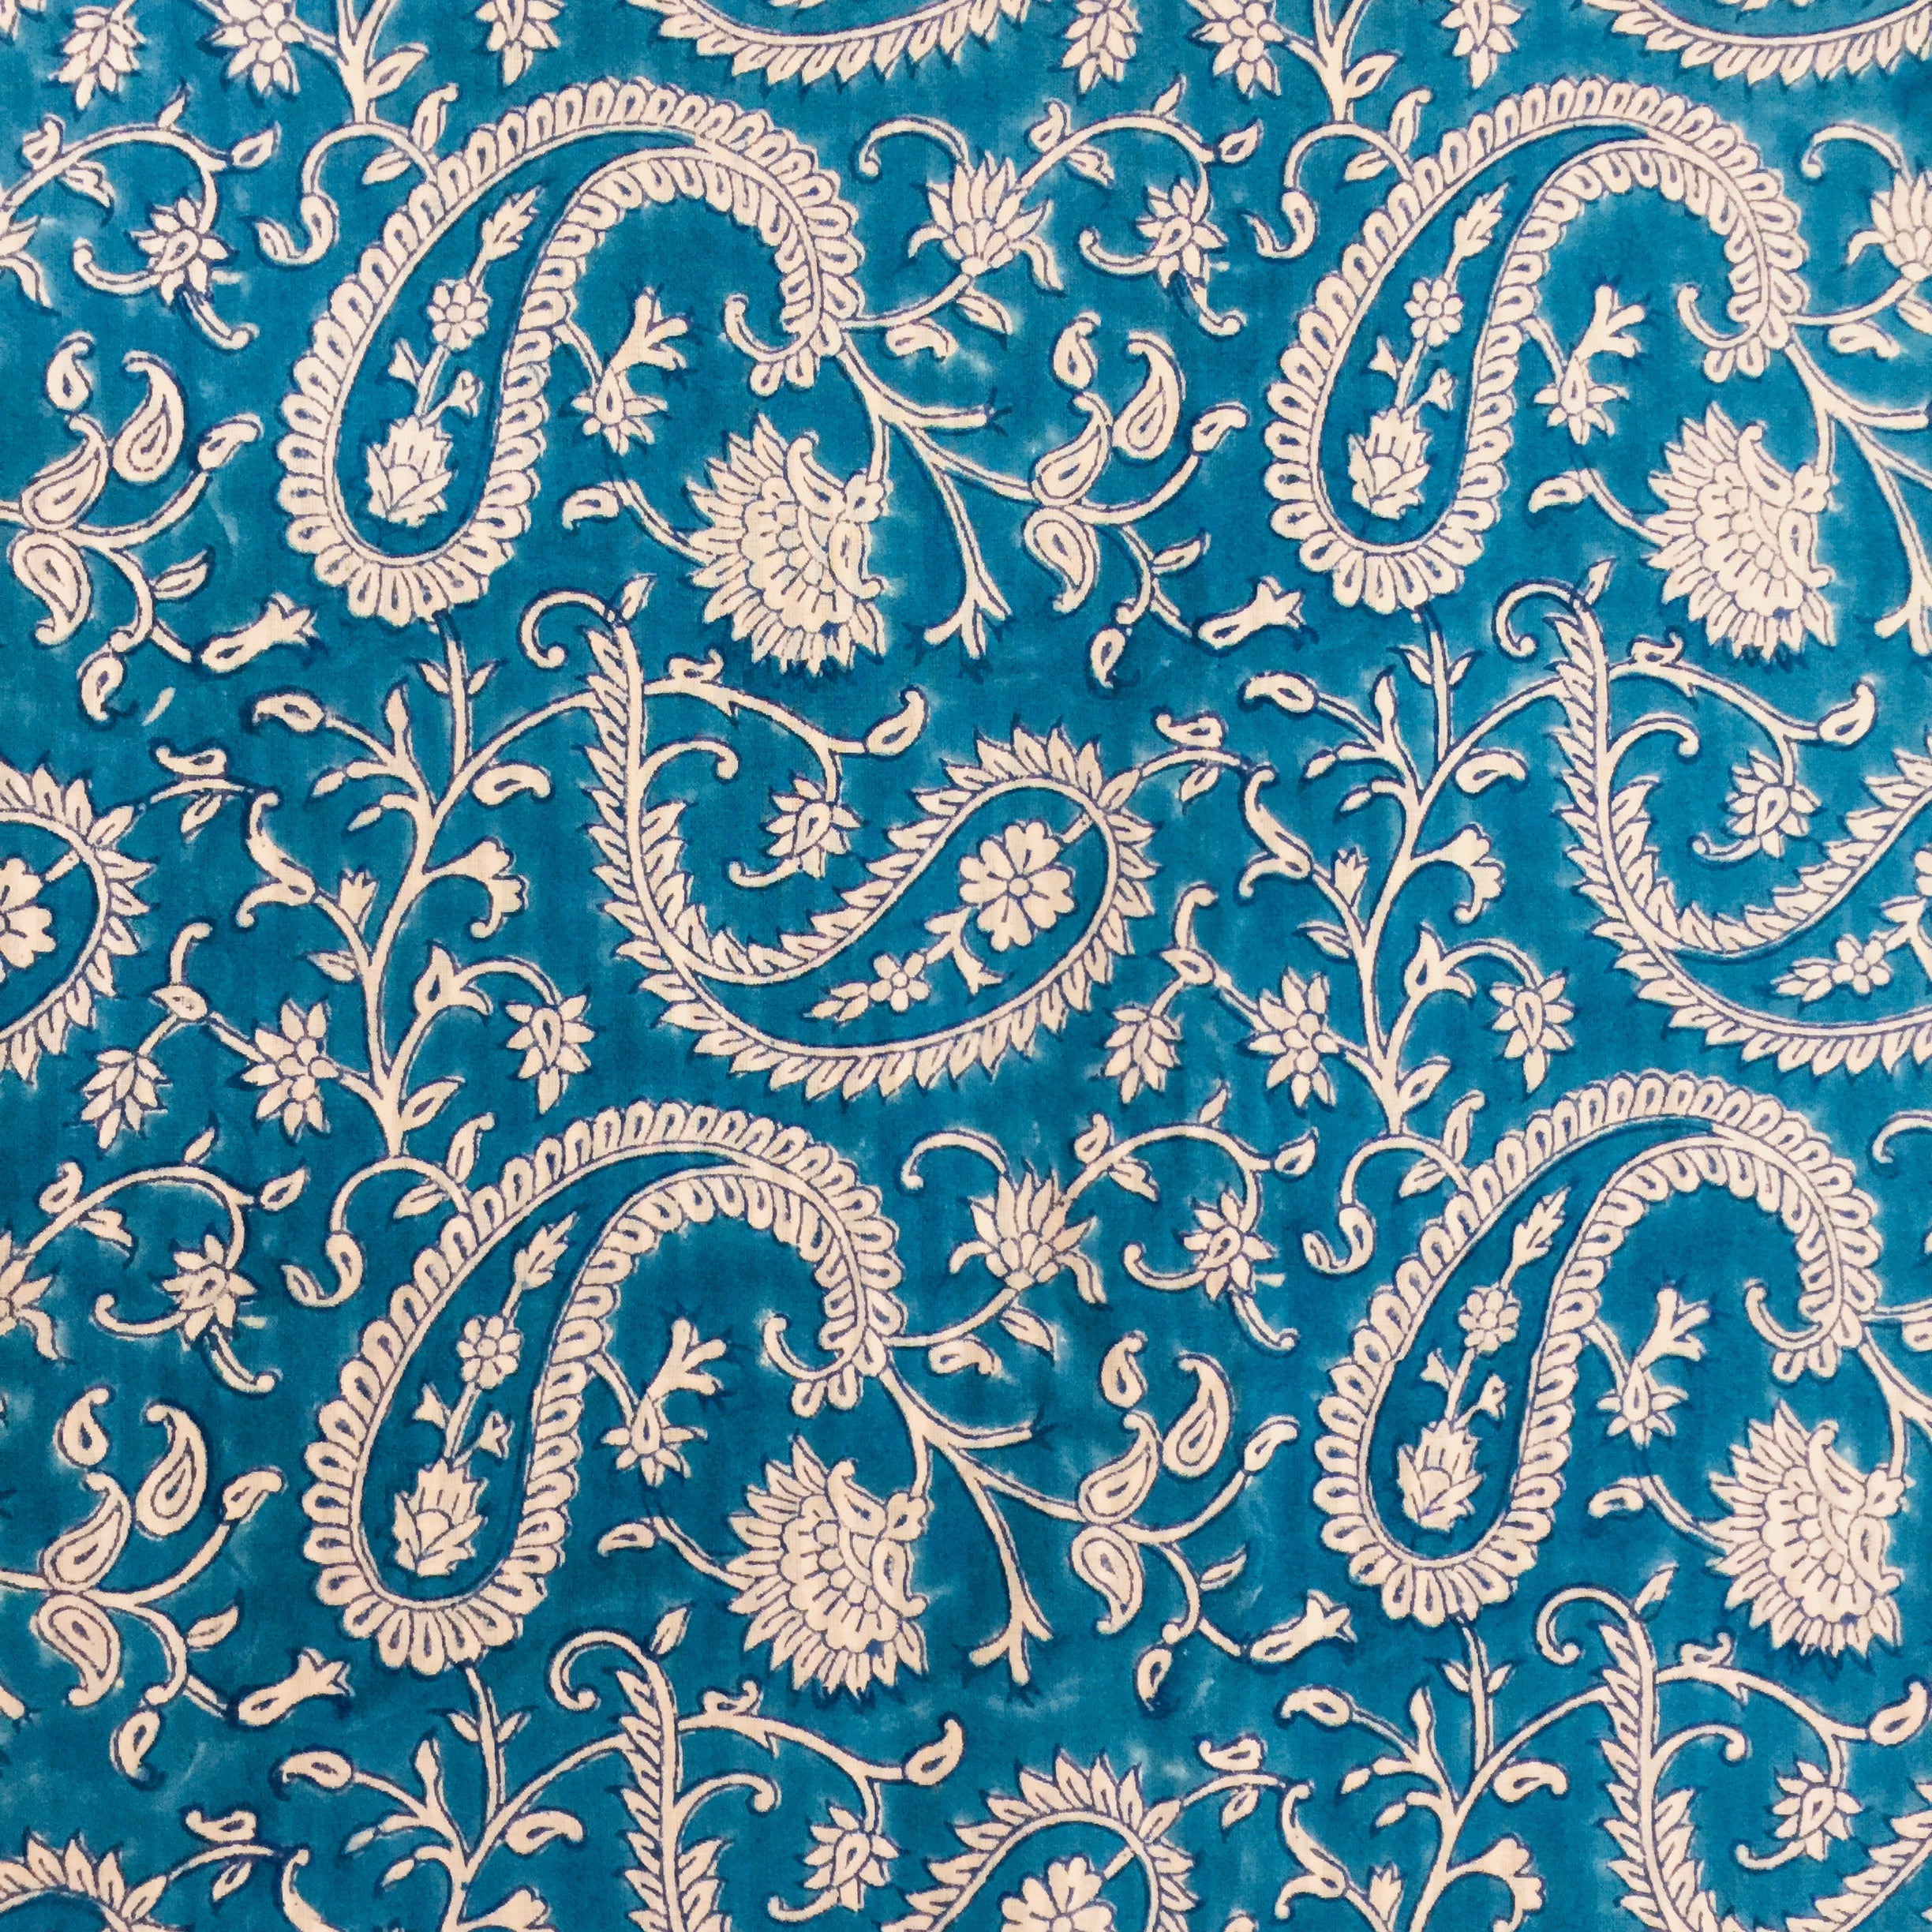 Teal paisley duvet cover - Vintage India NYC